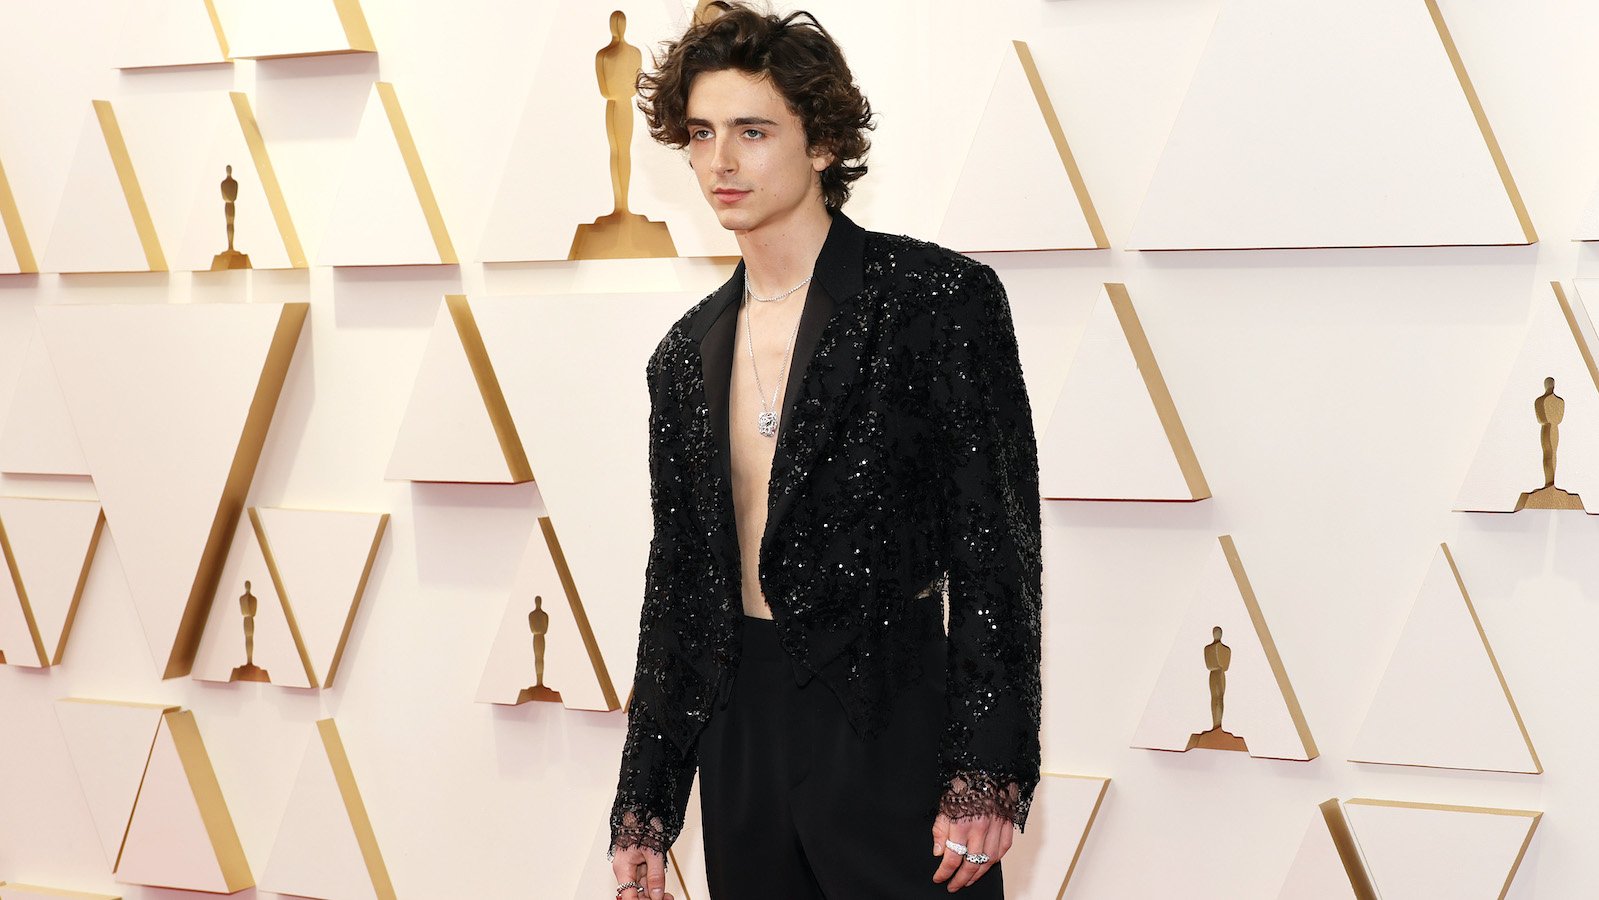 Timothée Chalamet posing at the 2022 Academy Awards ceremony held at the Dolby Theatre in Hollywood, Los Angeles.